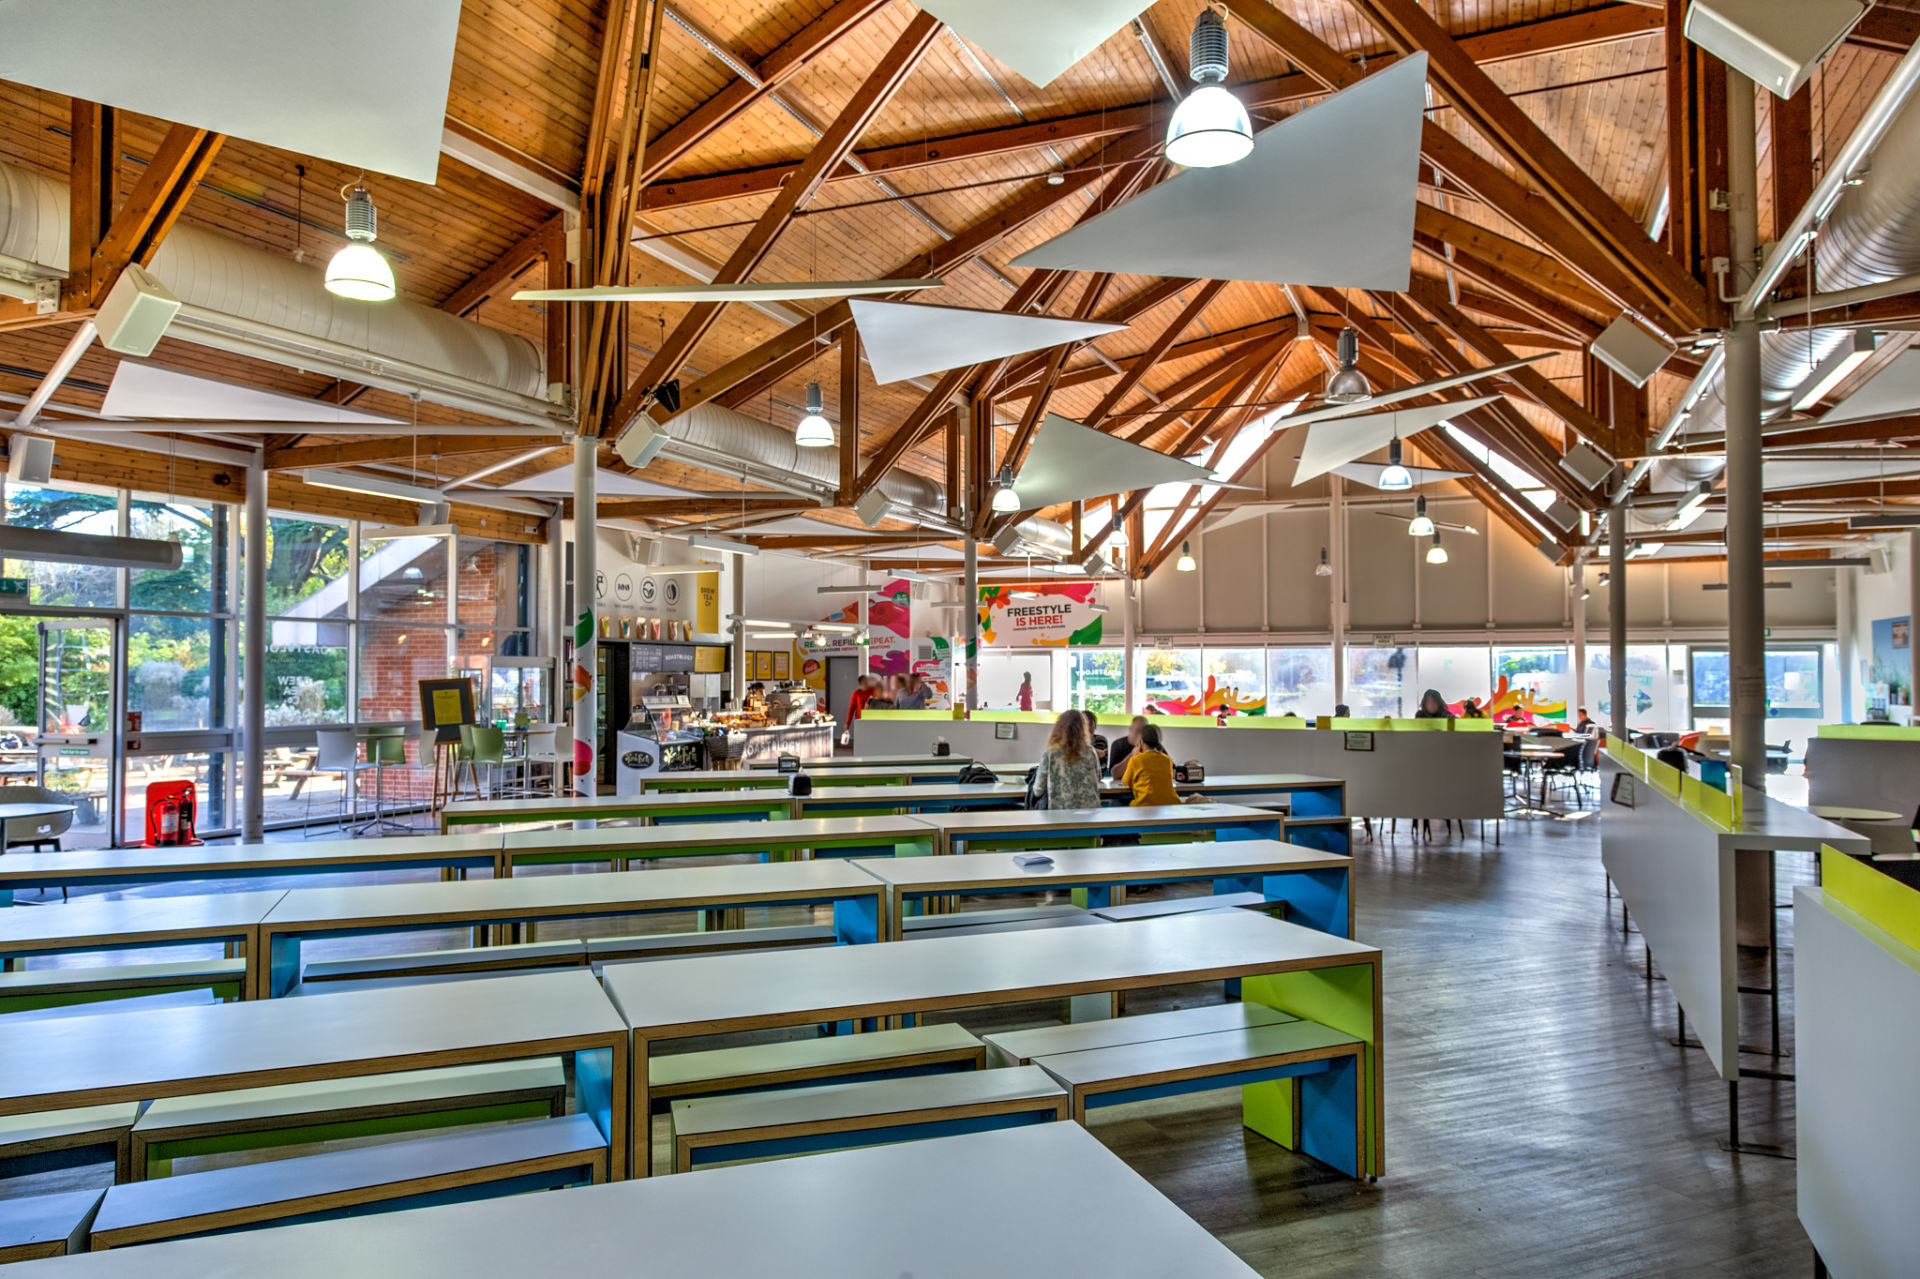 The Square tables and students dining